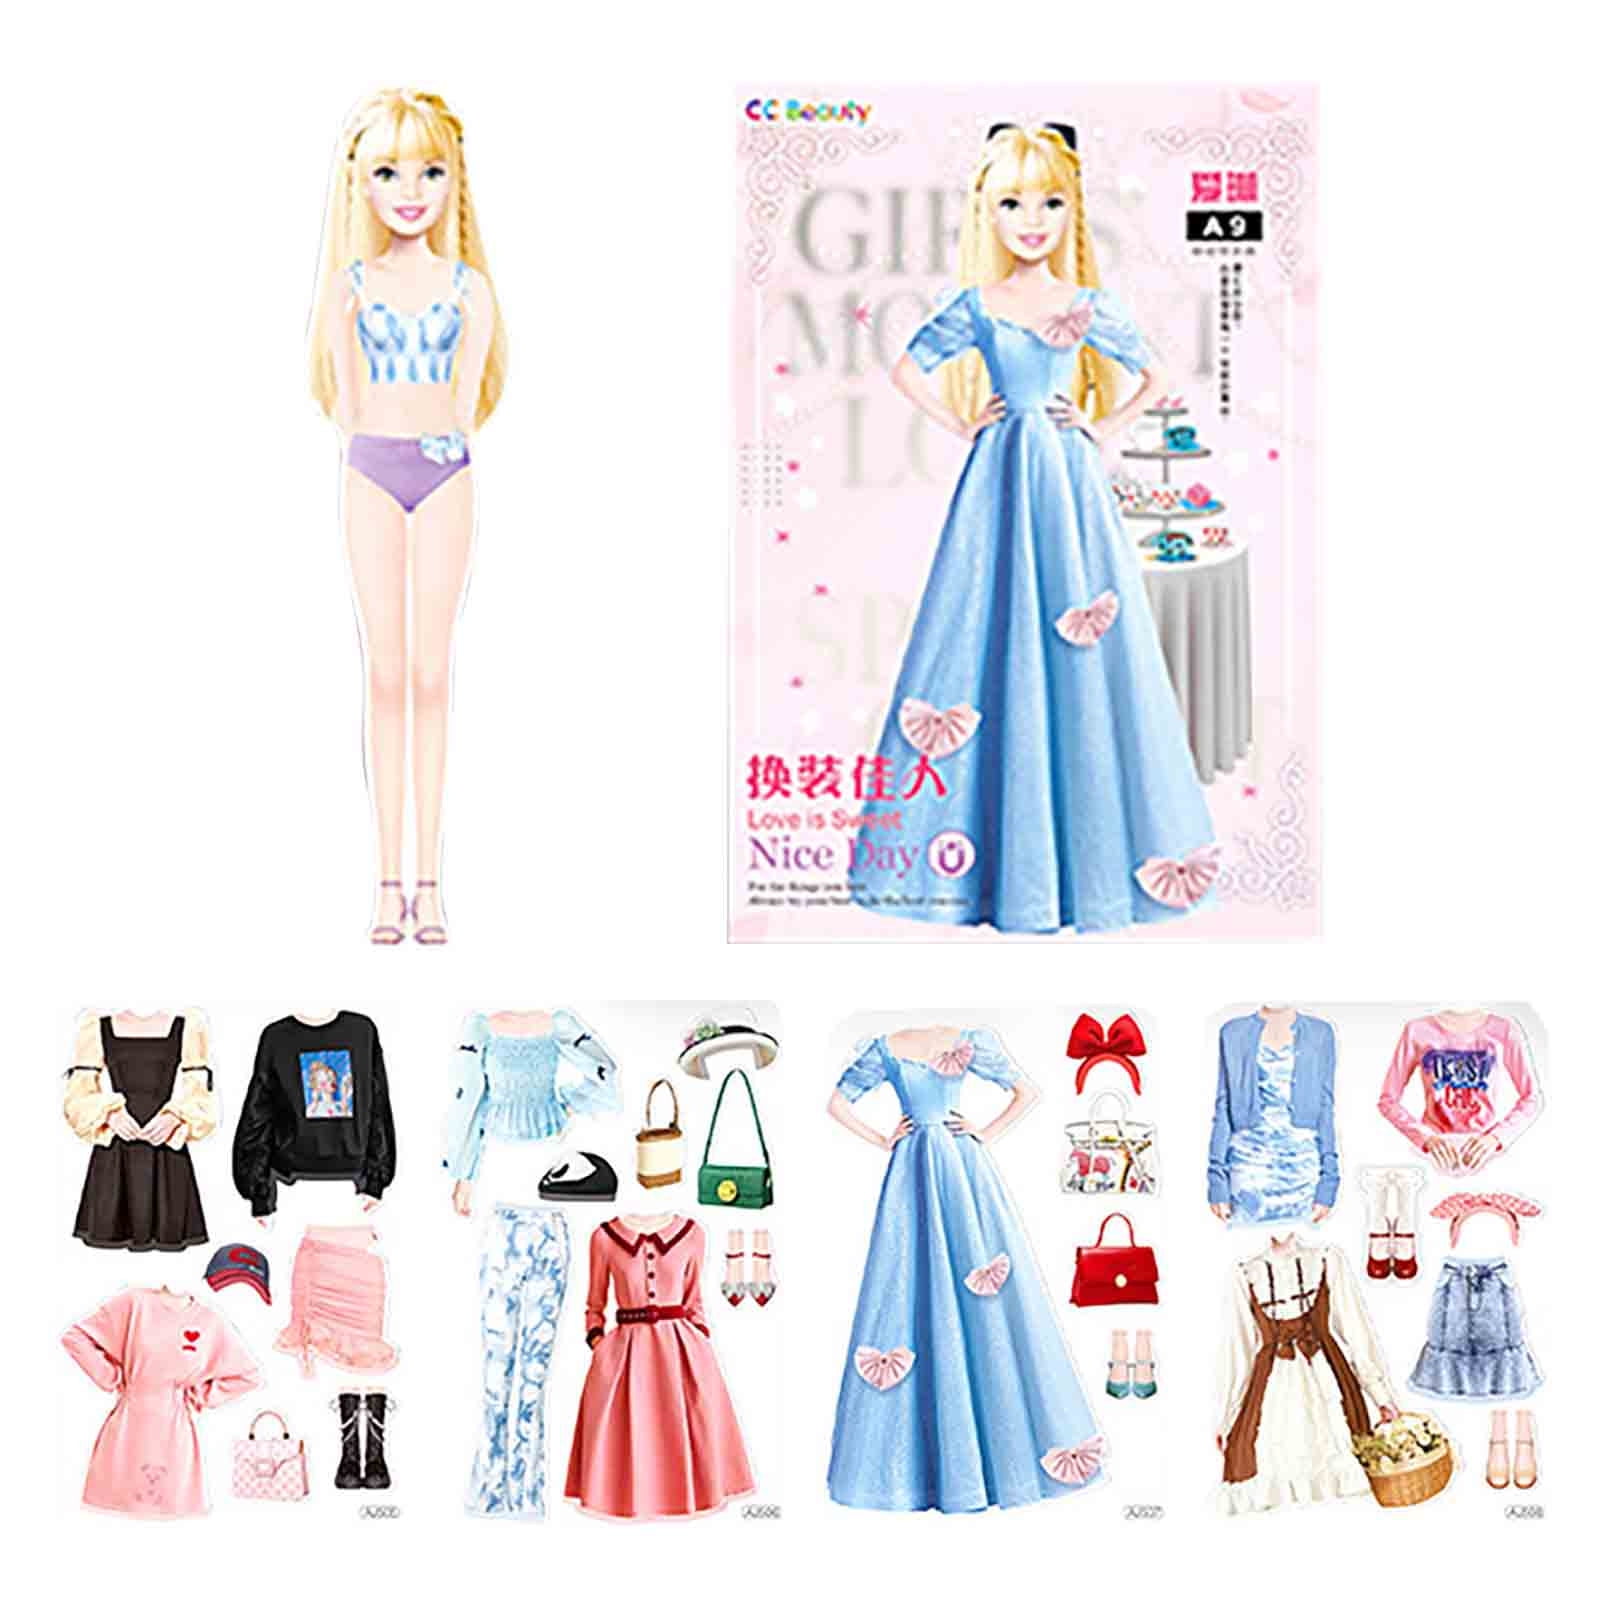 Magnetic Princess Dress Up Paper Doll Pretend Play Game Toys,Dollhouse Magnet People Clothes Puzzles Development for 3+ Year Old Girls Toddler